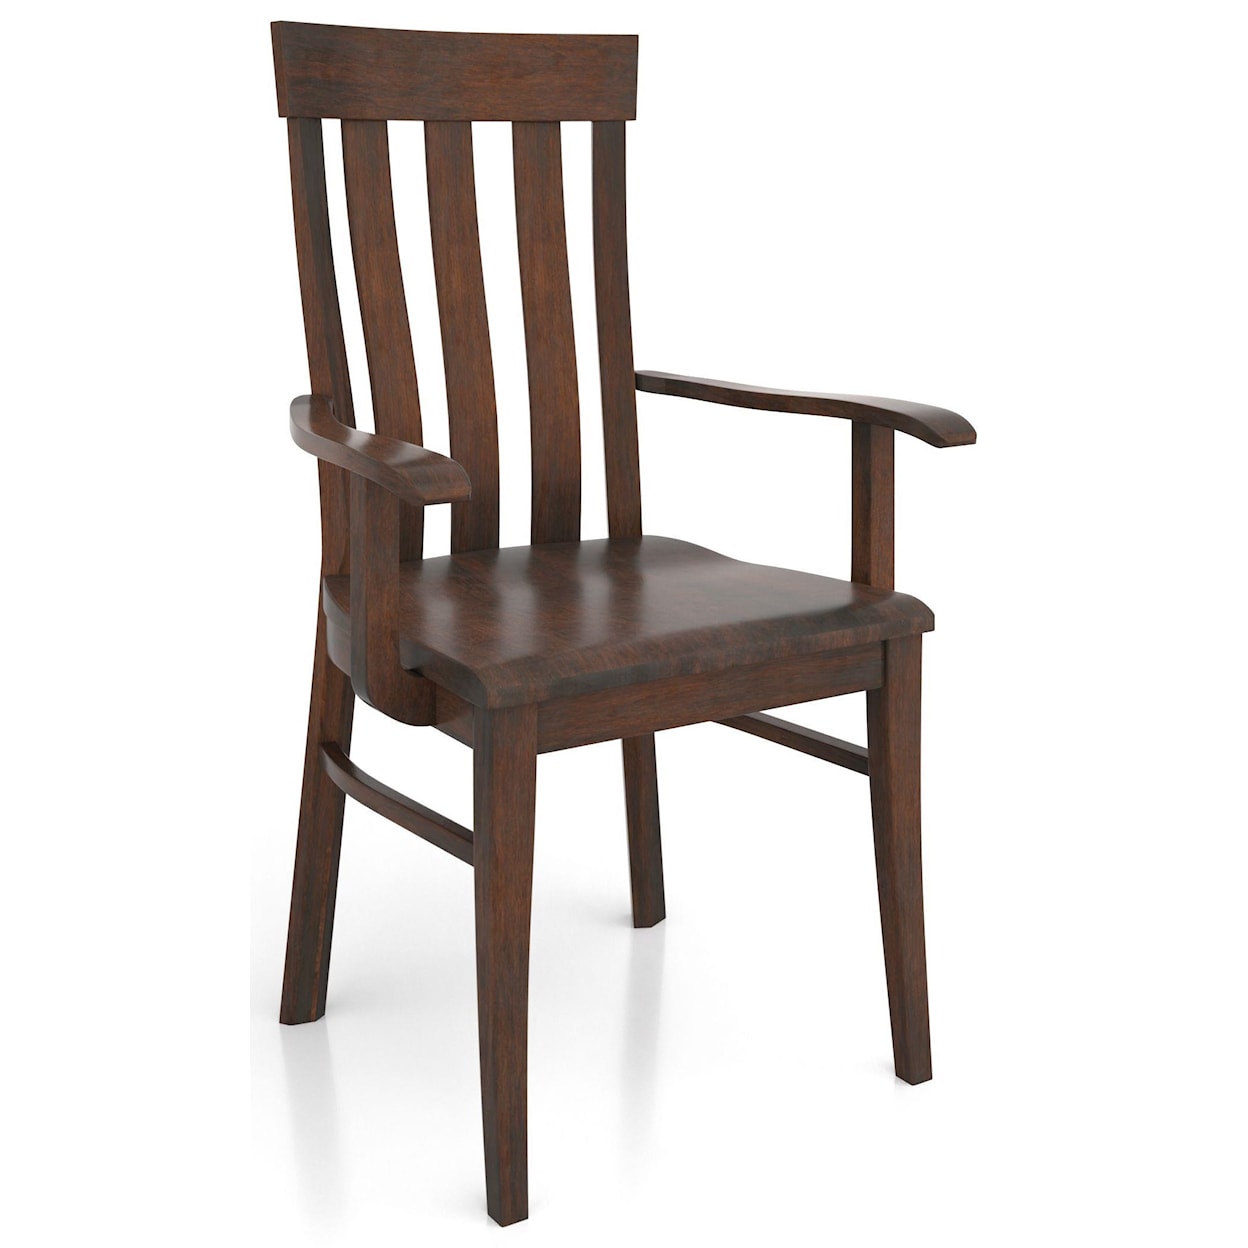 Country Comfort Woodworking Delta Arm Chair